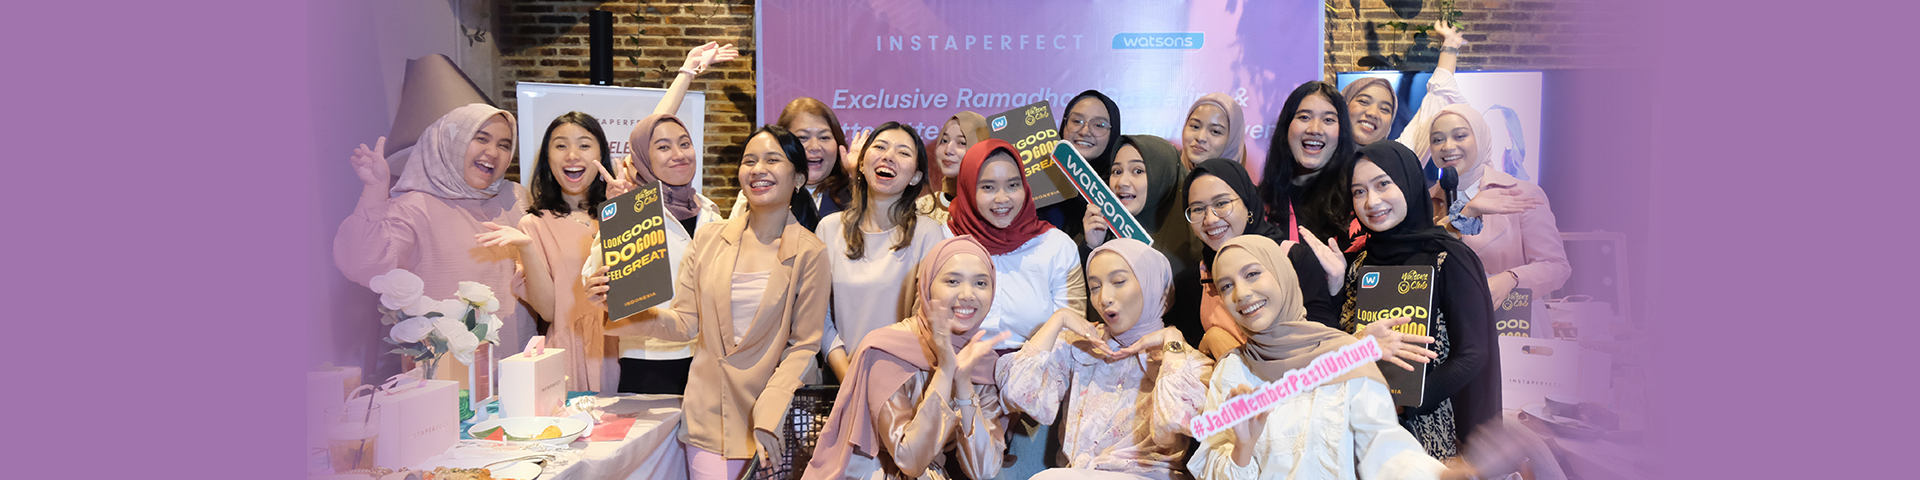 Exclusive Celebration for Watsons’ Members